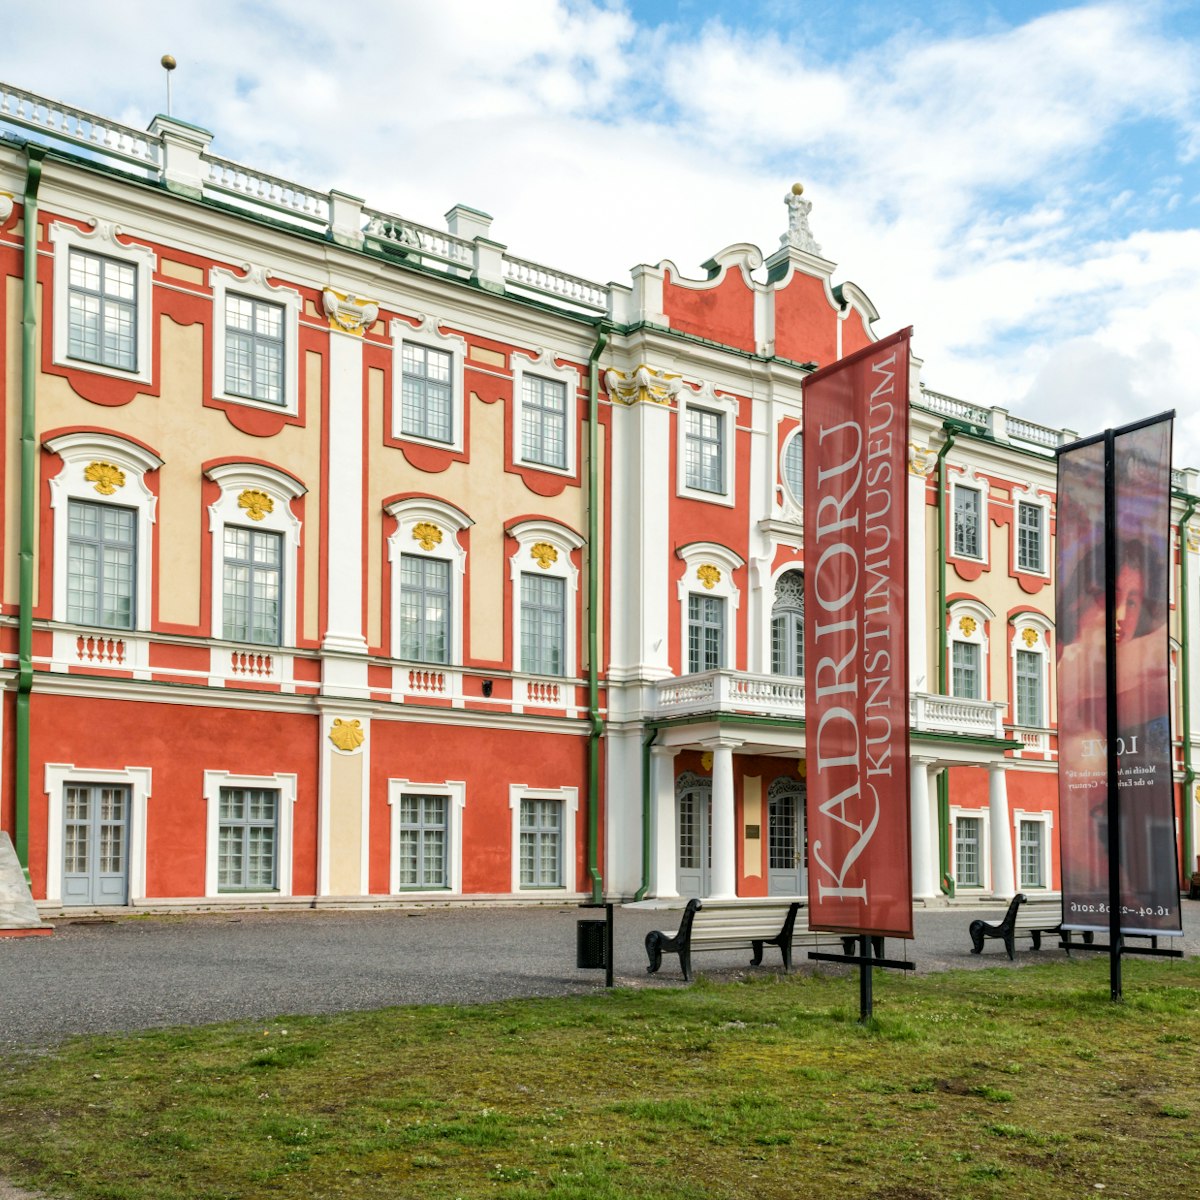 Tallinn, Estonia - July 04, 2016: Kadriorg - baroque palace built for Peter the Great in 1718 now houses the Art Museum of Estonia's foreign collection.; Shutterstock ID 471676259; Your name (First / Last): Gemma Graham; GL account no.: 65050; Netsuite department name: Online Editorial; Full Product or Project name including edition: BiT Destination Page Images